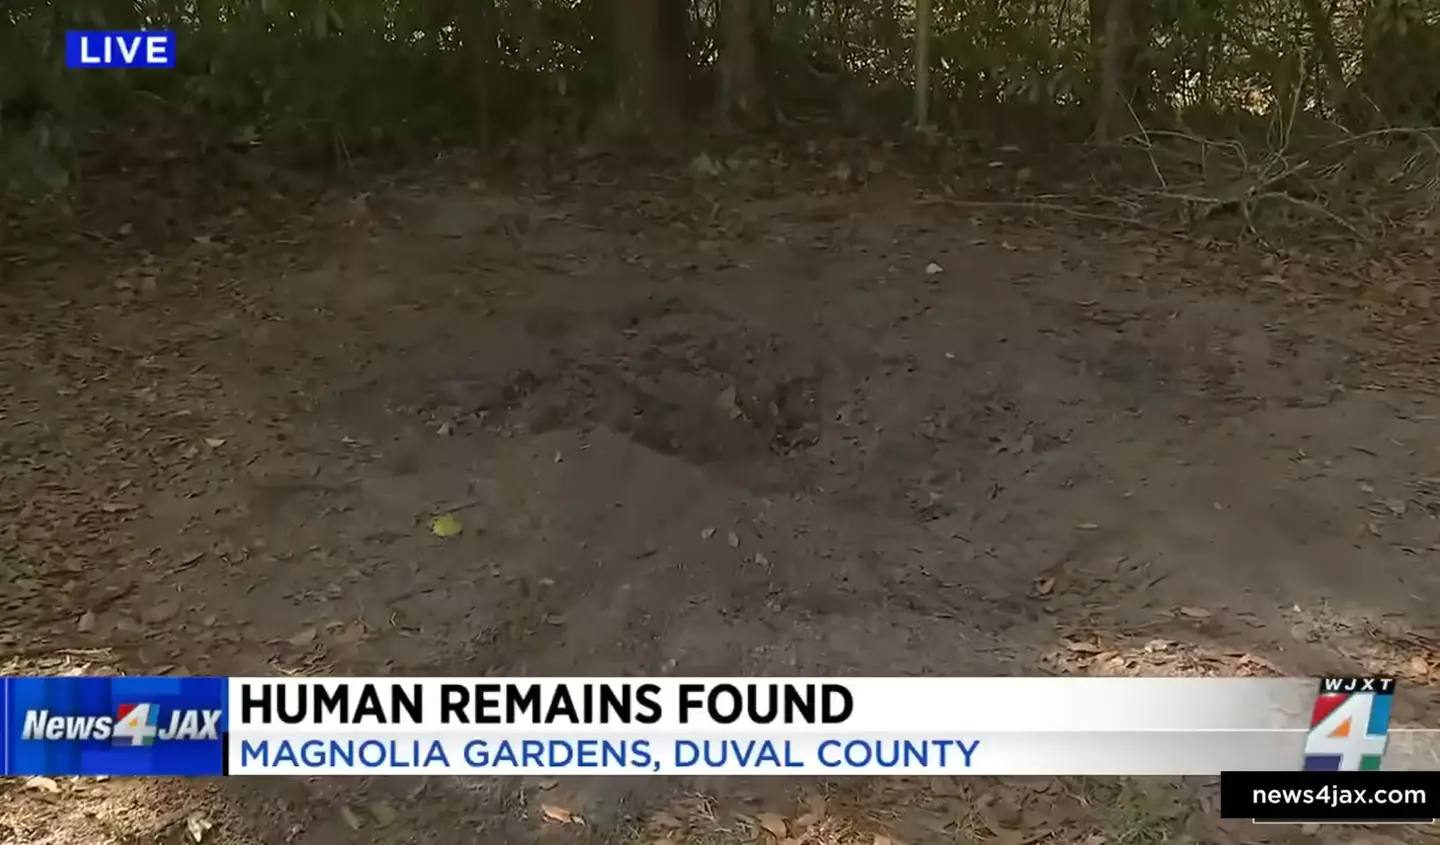 The body was found in the backyard of the Jacksonville home.